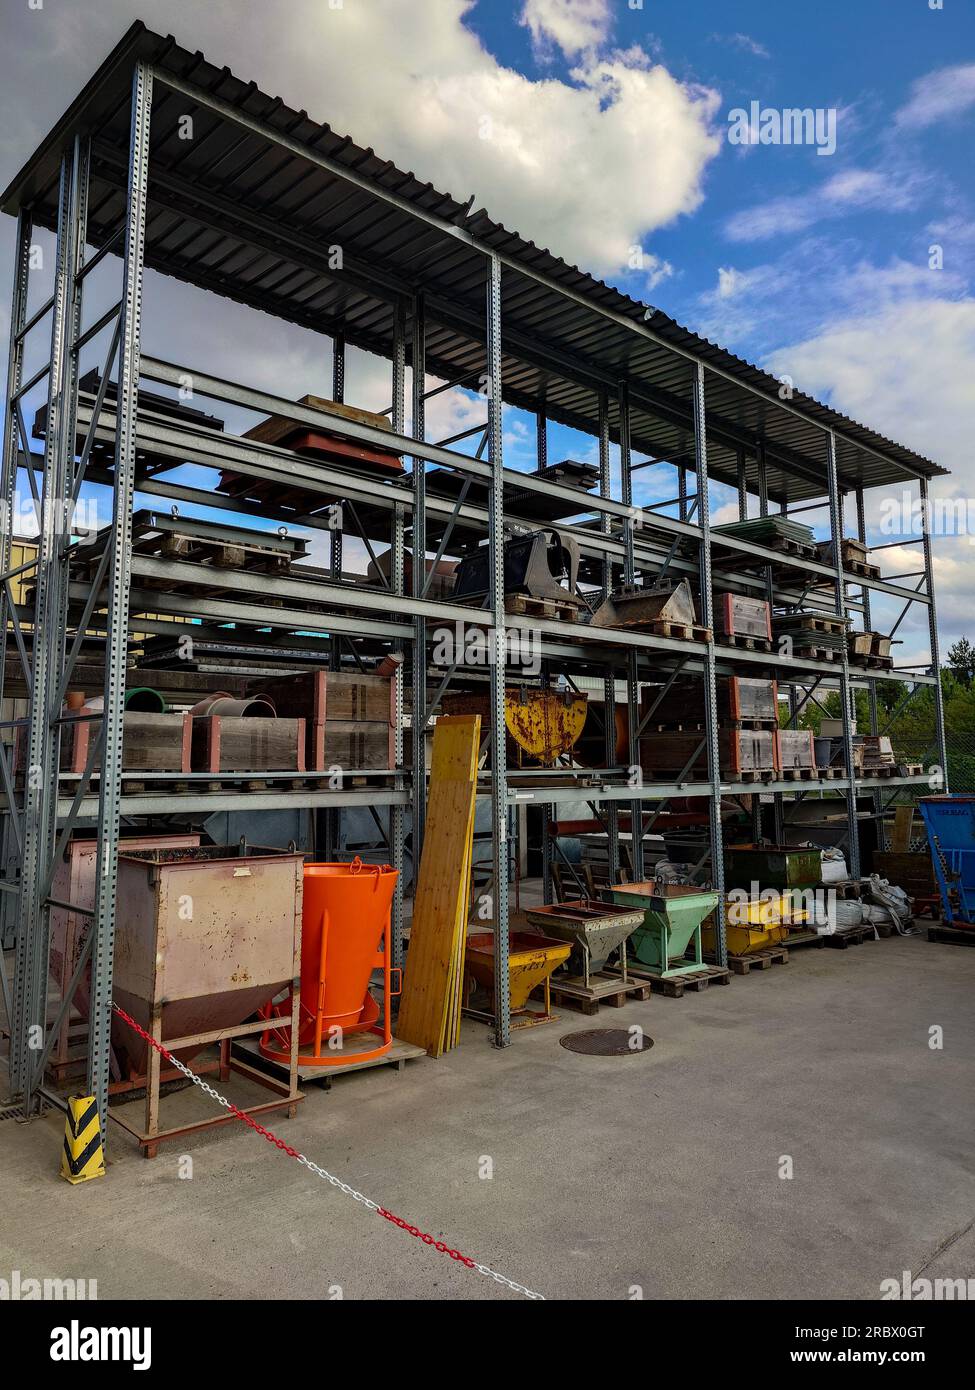 Construction site stacked storage shelves with pallets, cement mixers and raw materials. Exterior shot, sunny blue sky, no people. Stock Photo